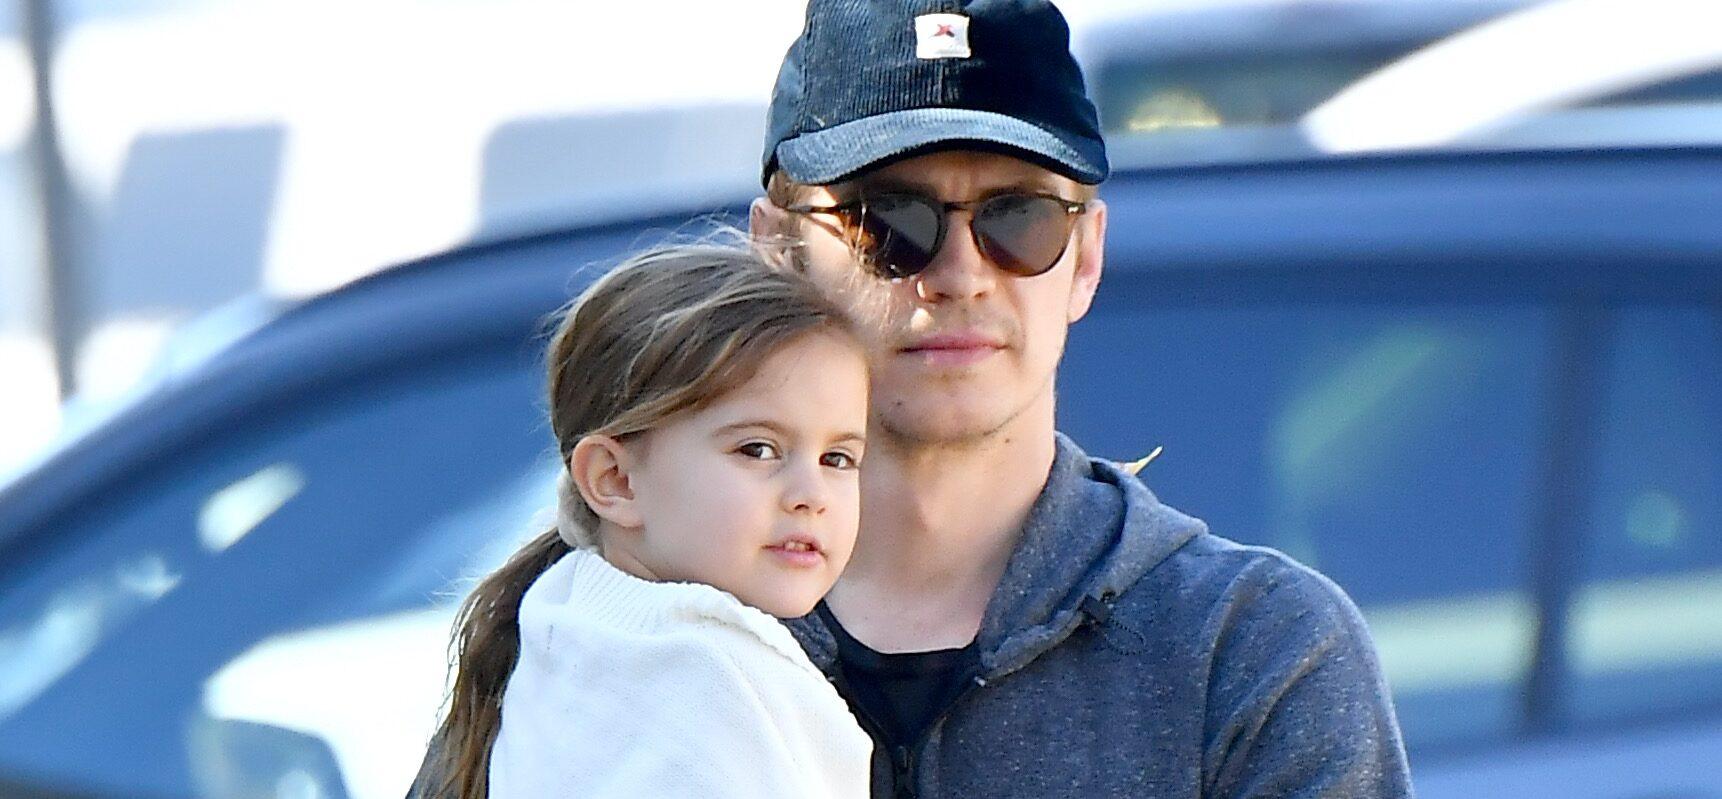 Hayden Christensen Says He ‘Definitely’ Scaled Back On Acting To Focus On Being A Dad